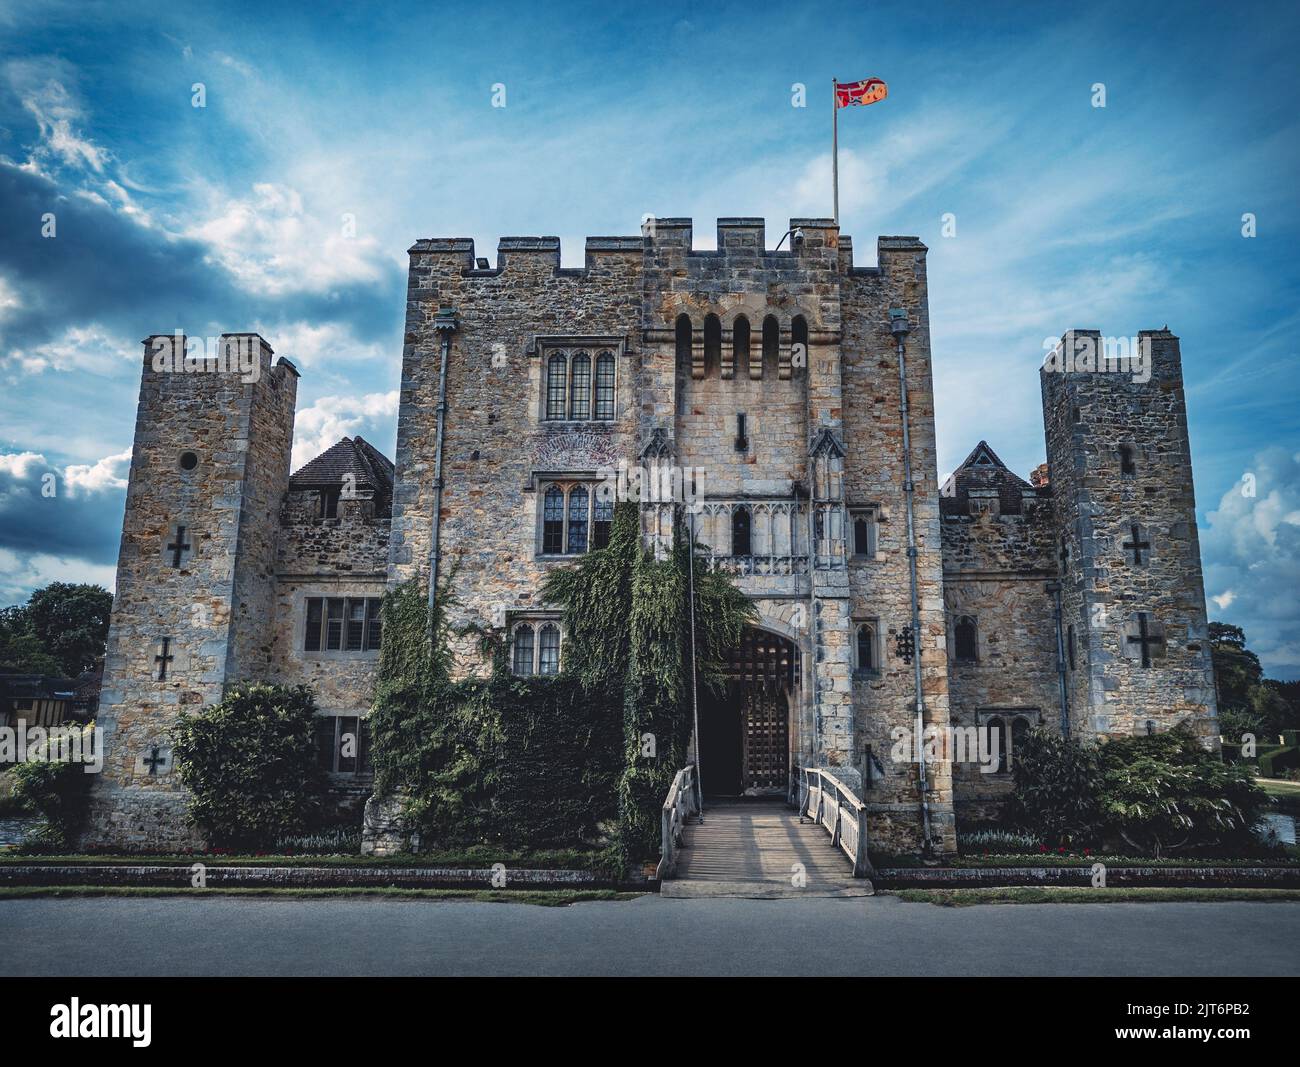 Hever Castle and Gardens, the seat of the Boleyn family, now privately owned. Hever, Near Edenbridge, Kent, United Kingdom Stock Photo